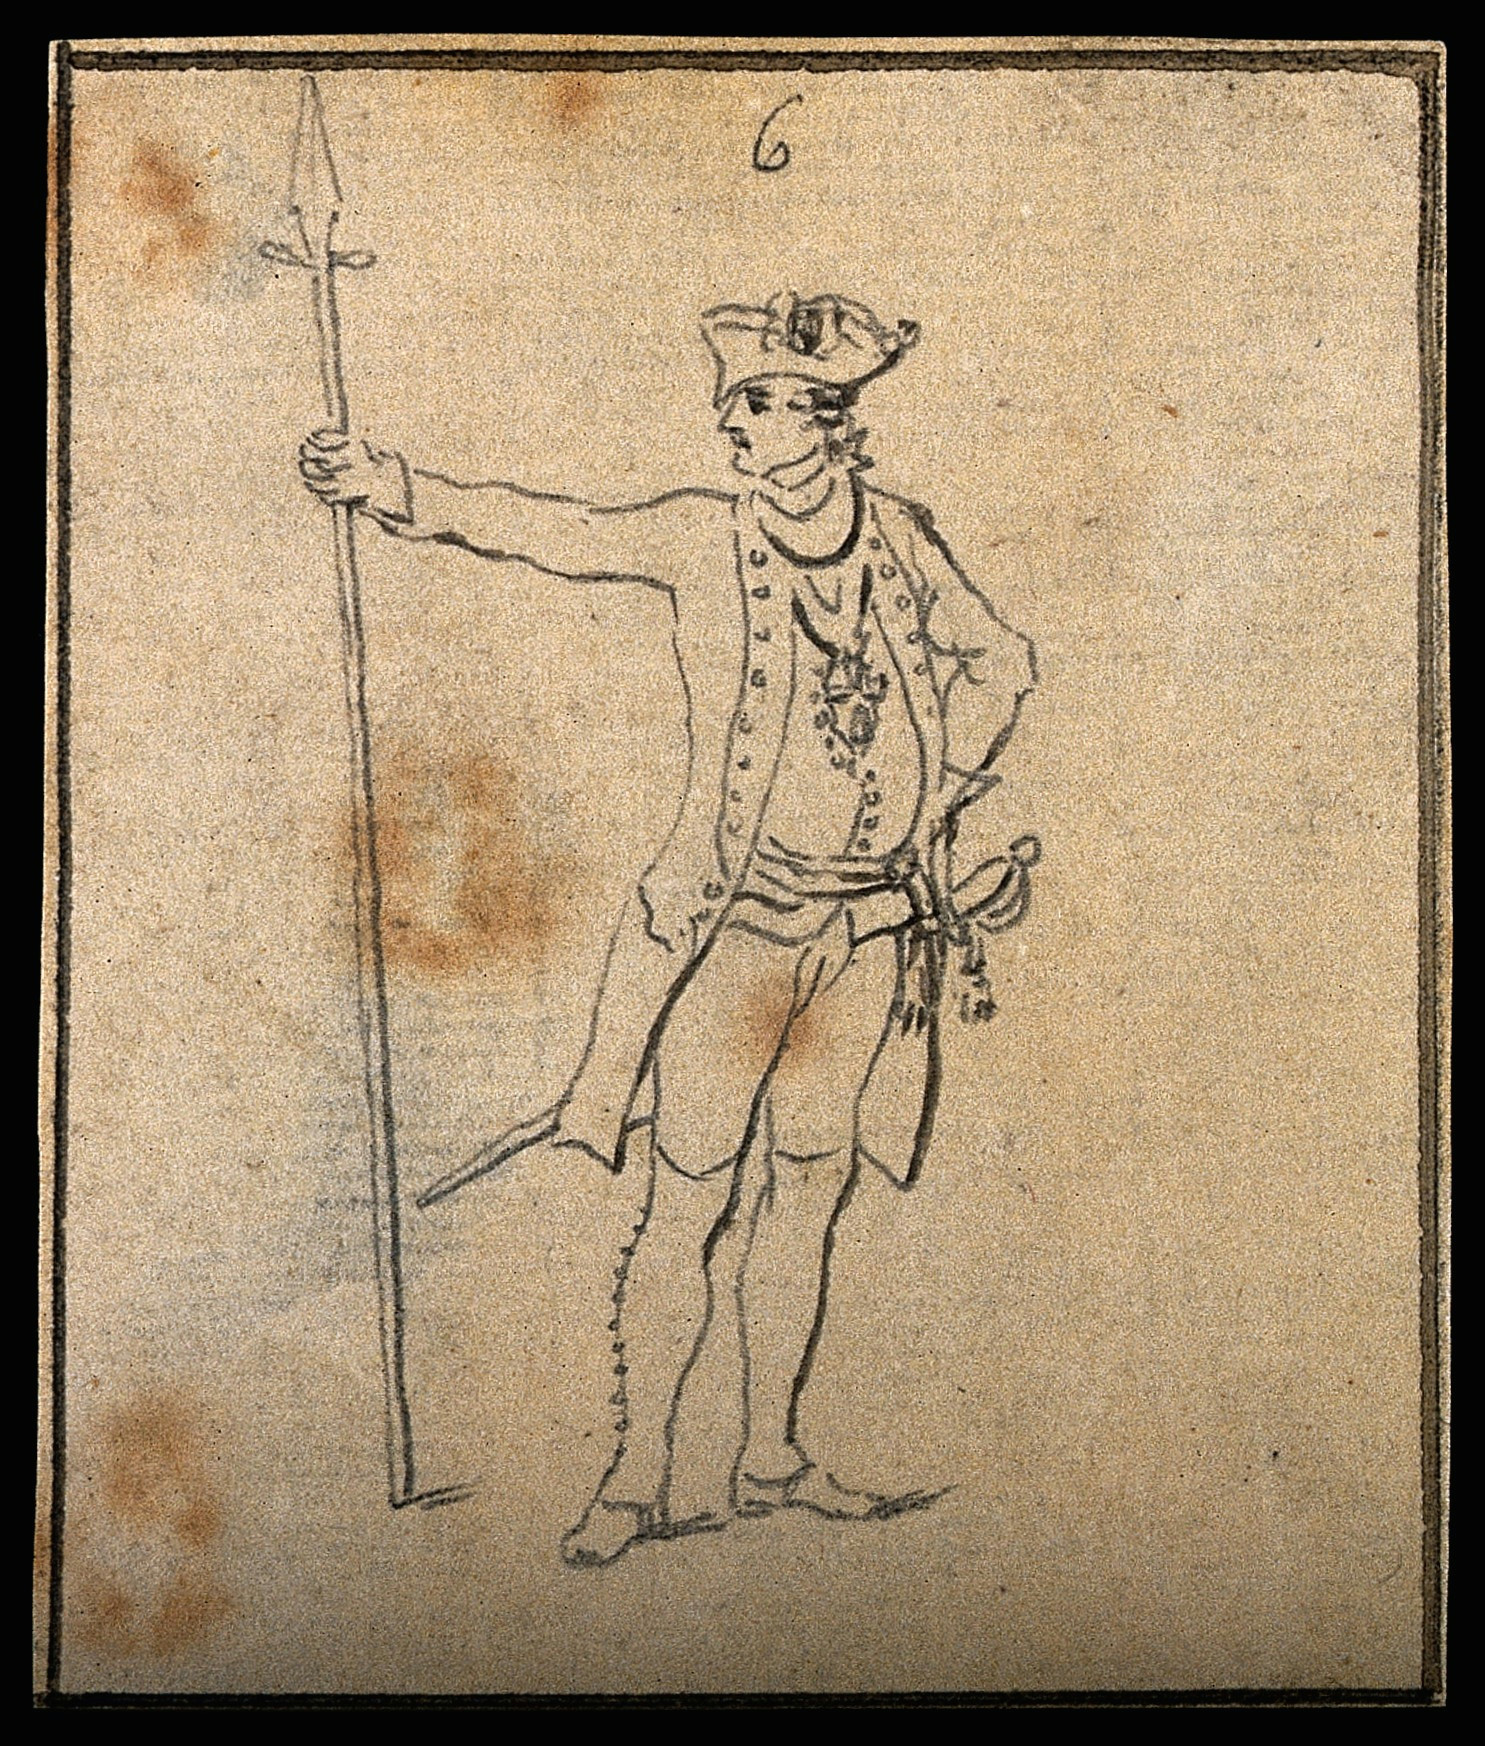 C Drawing Pixels File A soldier In the Prussian Army Drawing C 1794 Wellcome